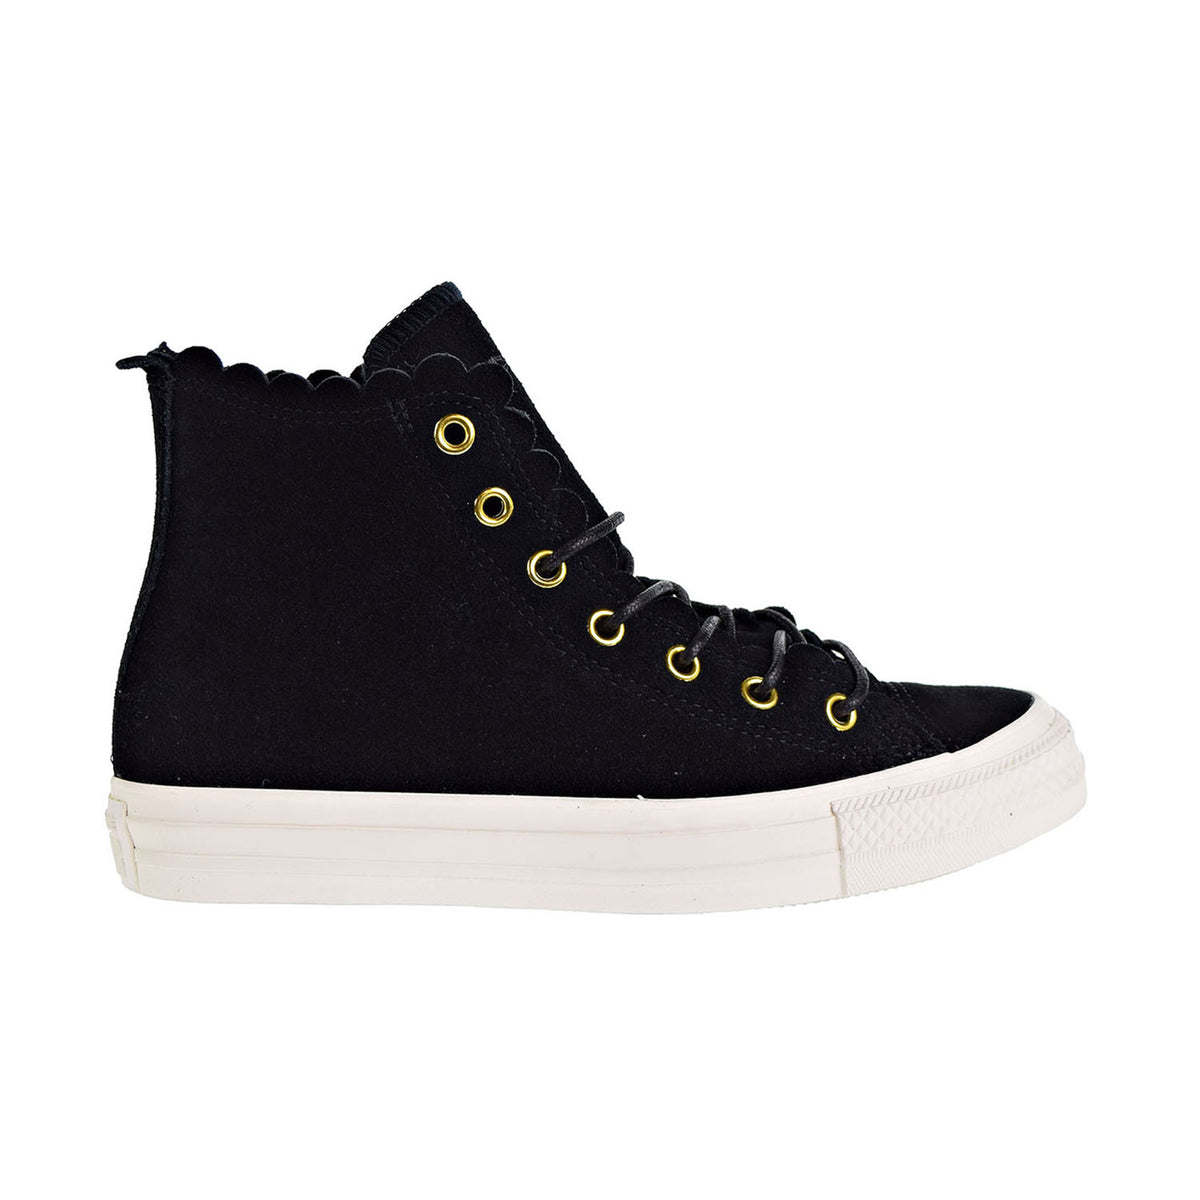 Converse Chuck Taylor All Thrills Suede Women's Shoes